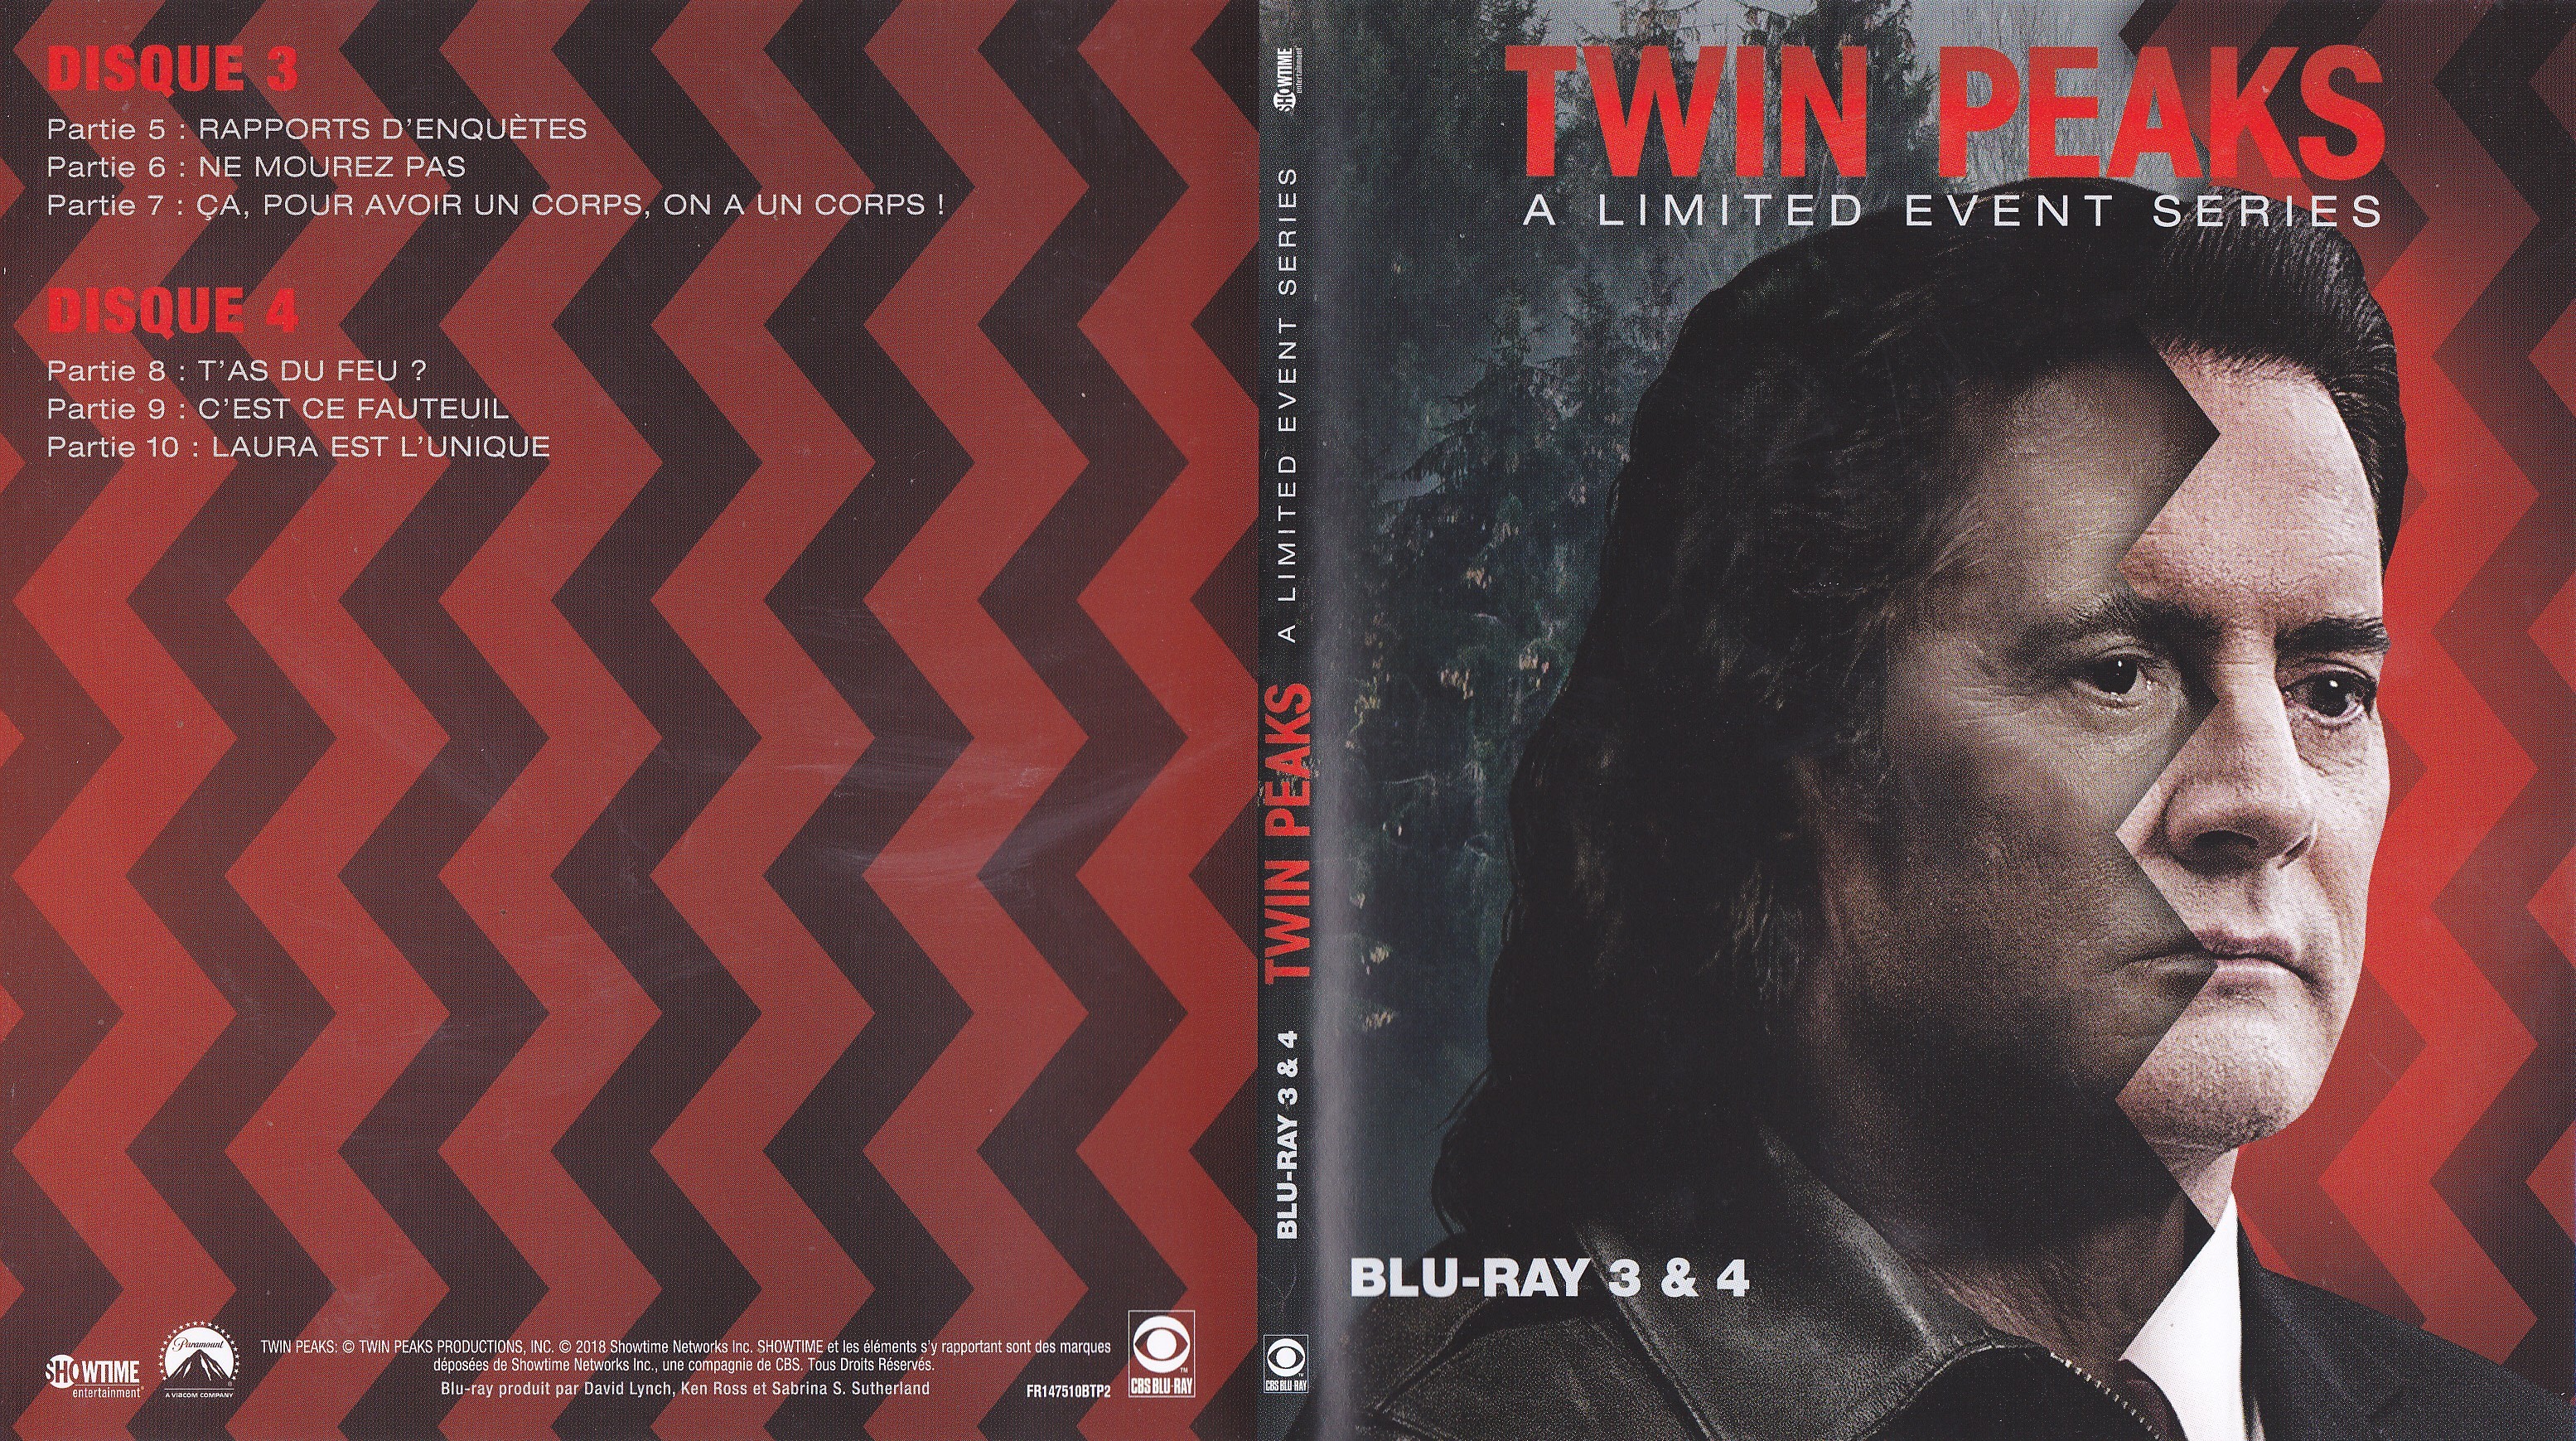 Jaquette DVD Twin Peaks A limited event series (BLU-RAY) v2